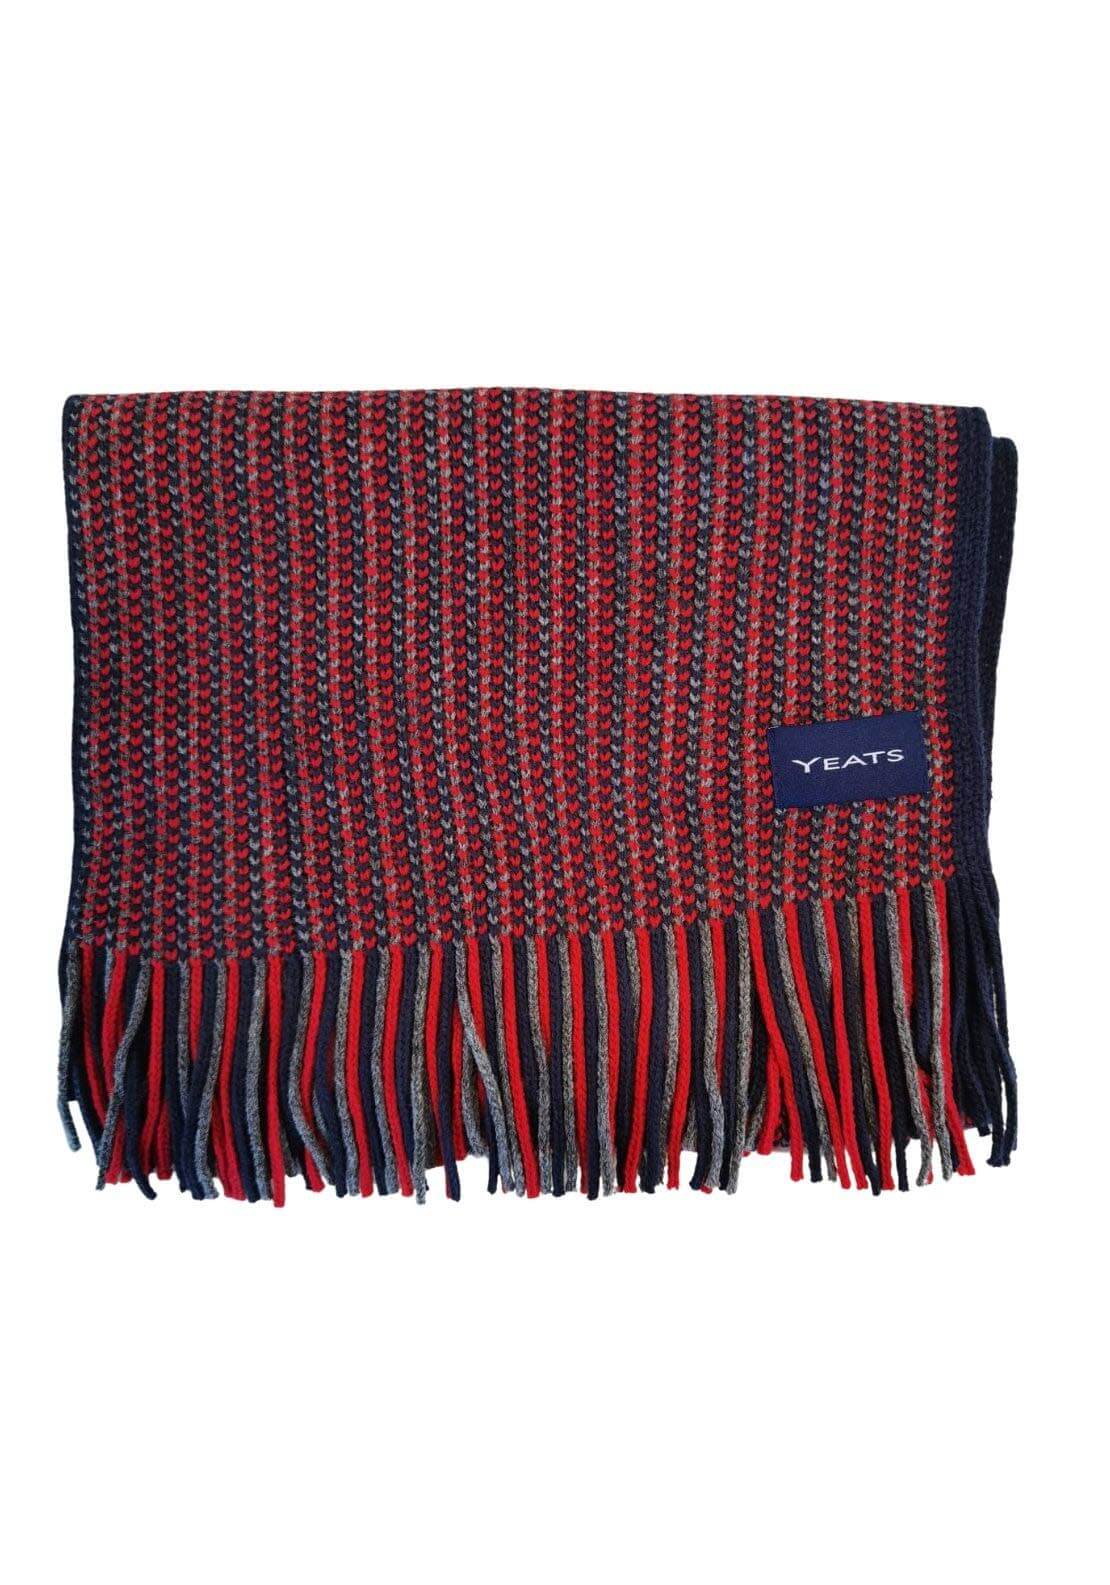 Yeats Boxed Raschel Scarves - Red 3 Shaws Department Stores